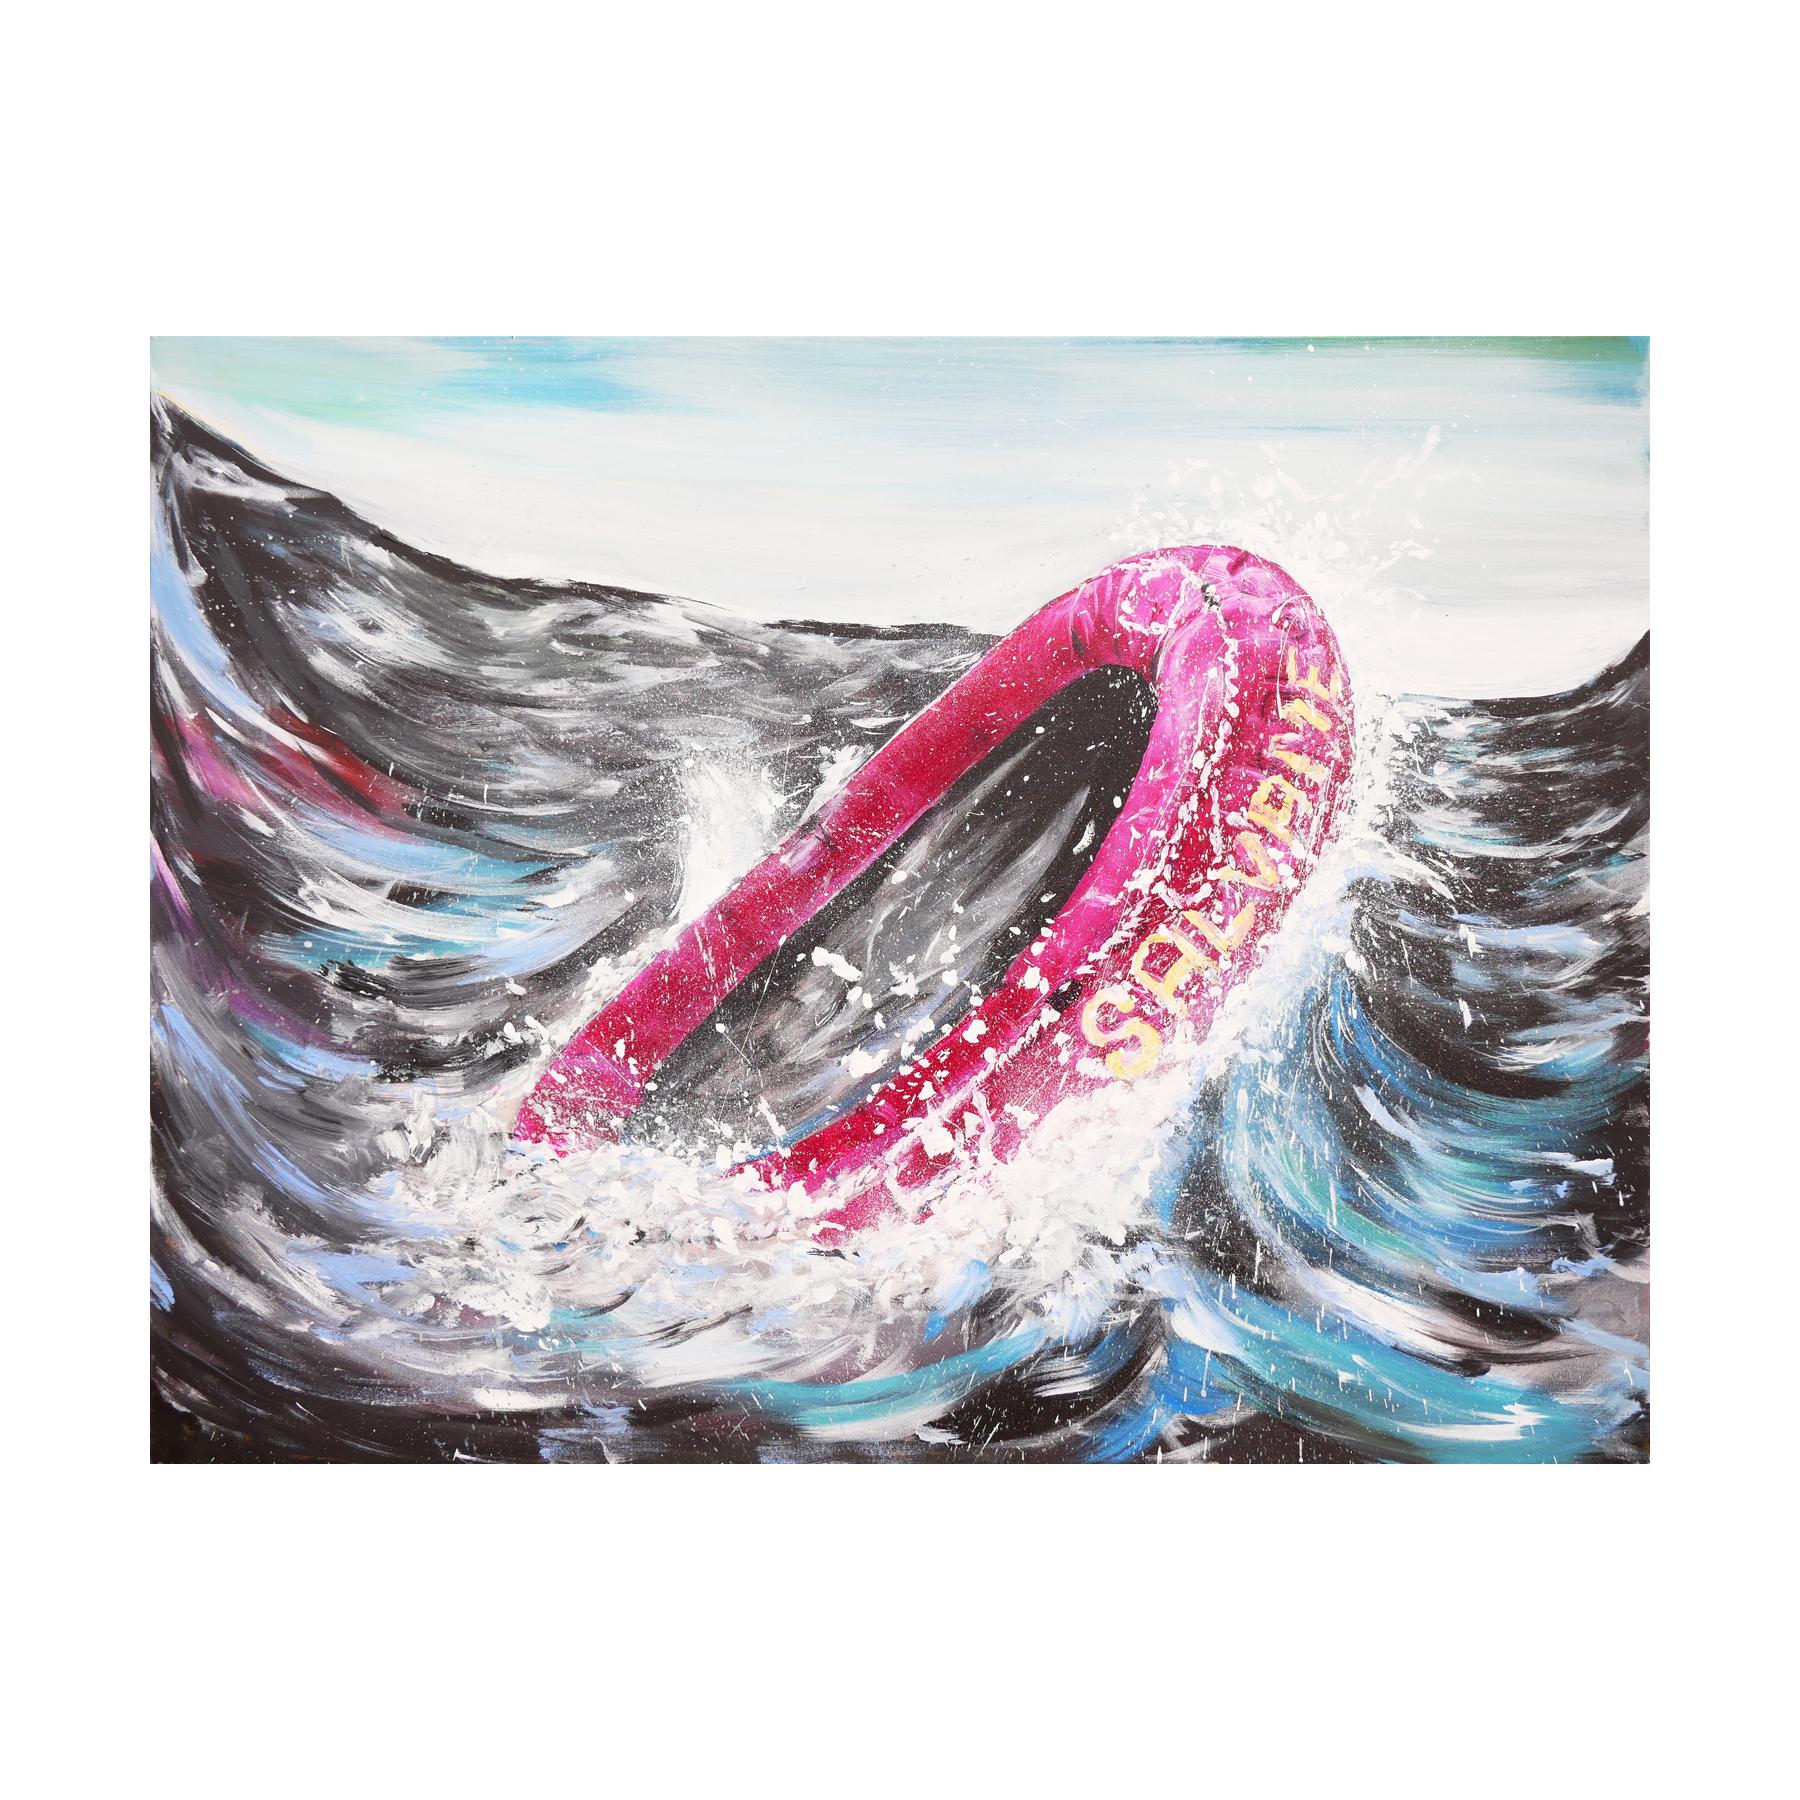 Blue and pink abstract contemporary seascape landscape by Houston, TX artist Moisés Villafuerte. This abstract painting features a large magenta lifeboat with the text 